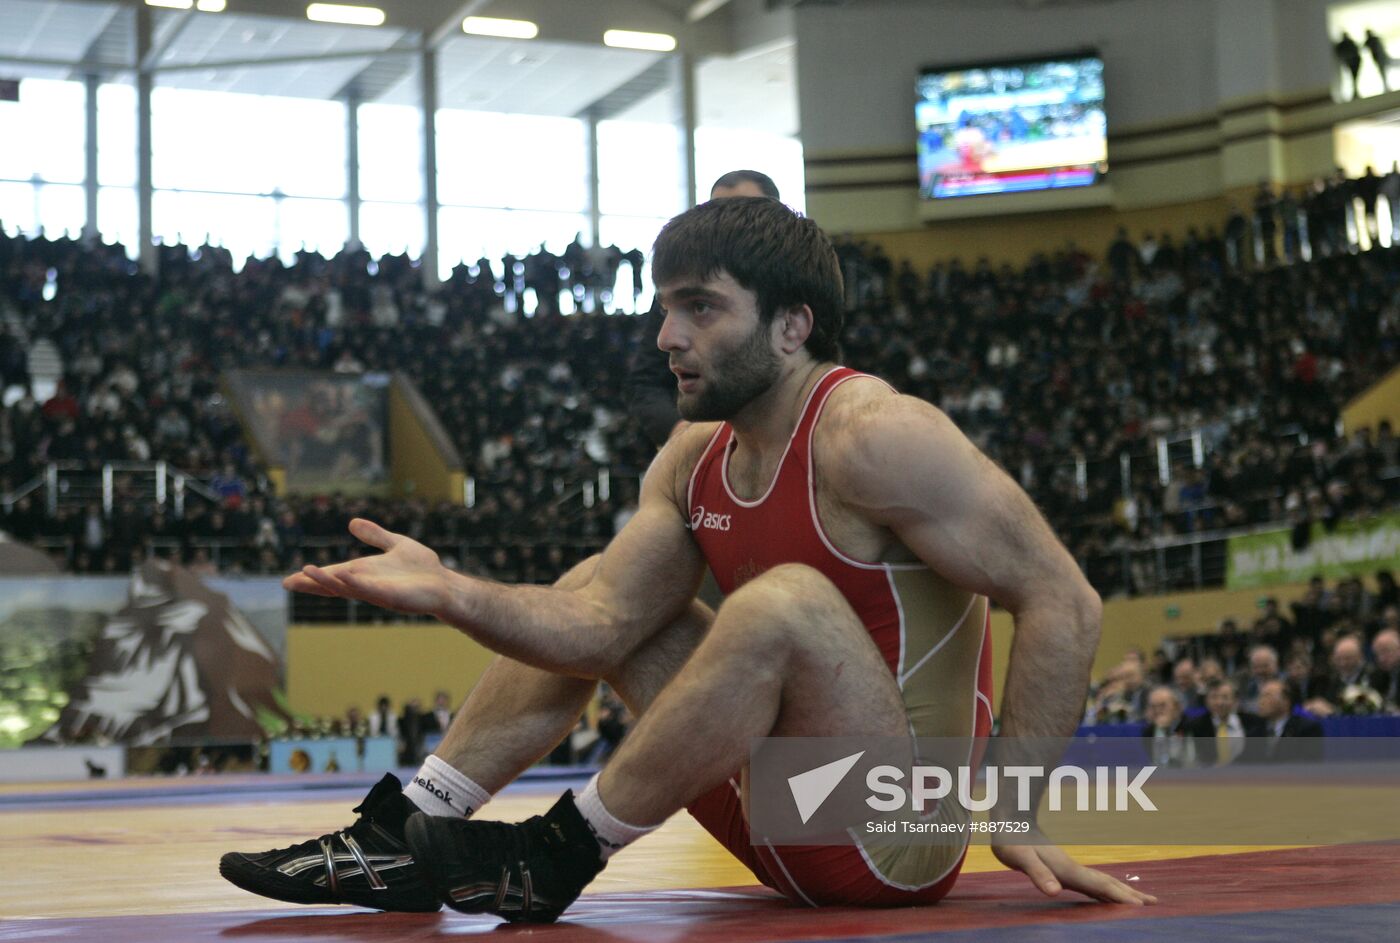 2011 Freestyle Wrestling World Cup